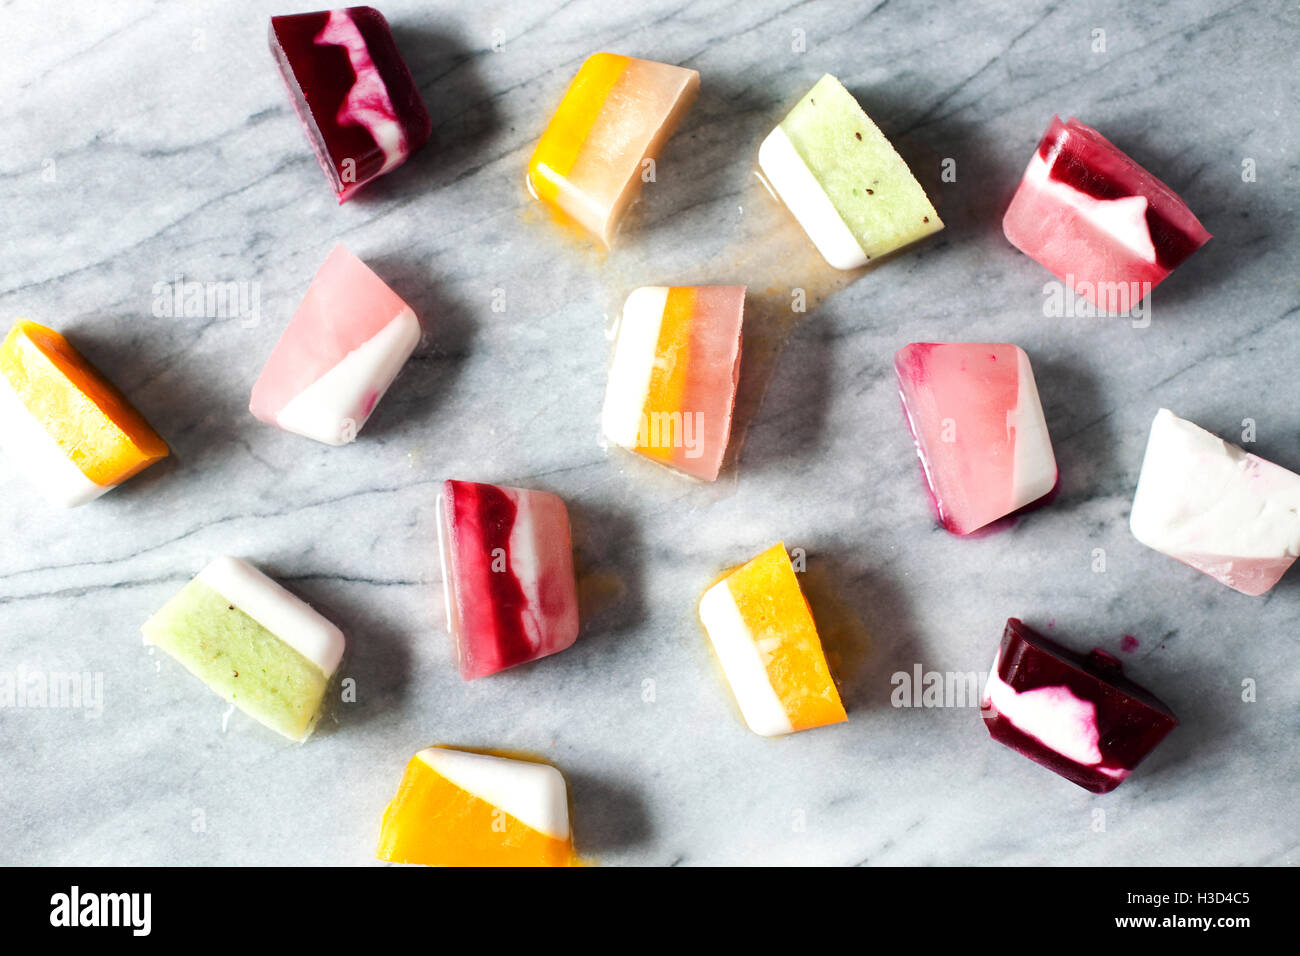 Overhead view of flavored ice cubes on marble counter Stock Photo